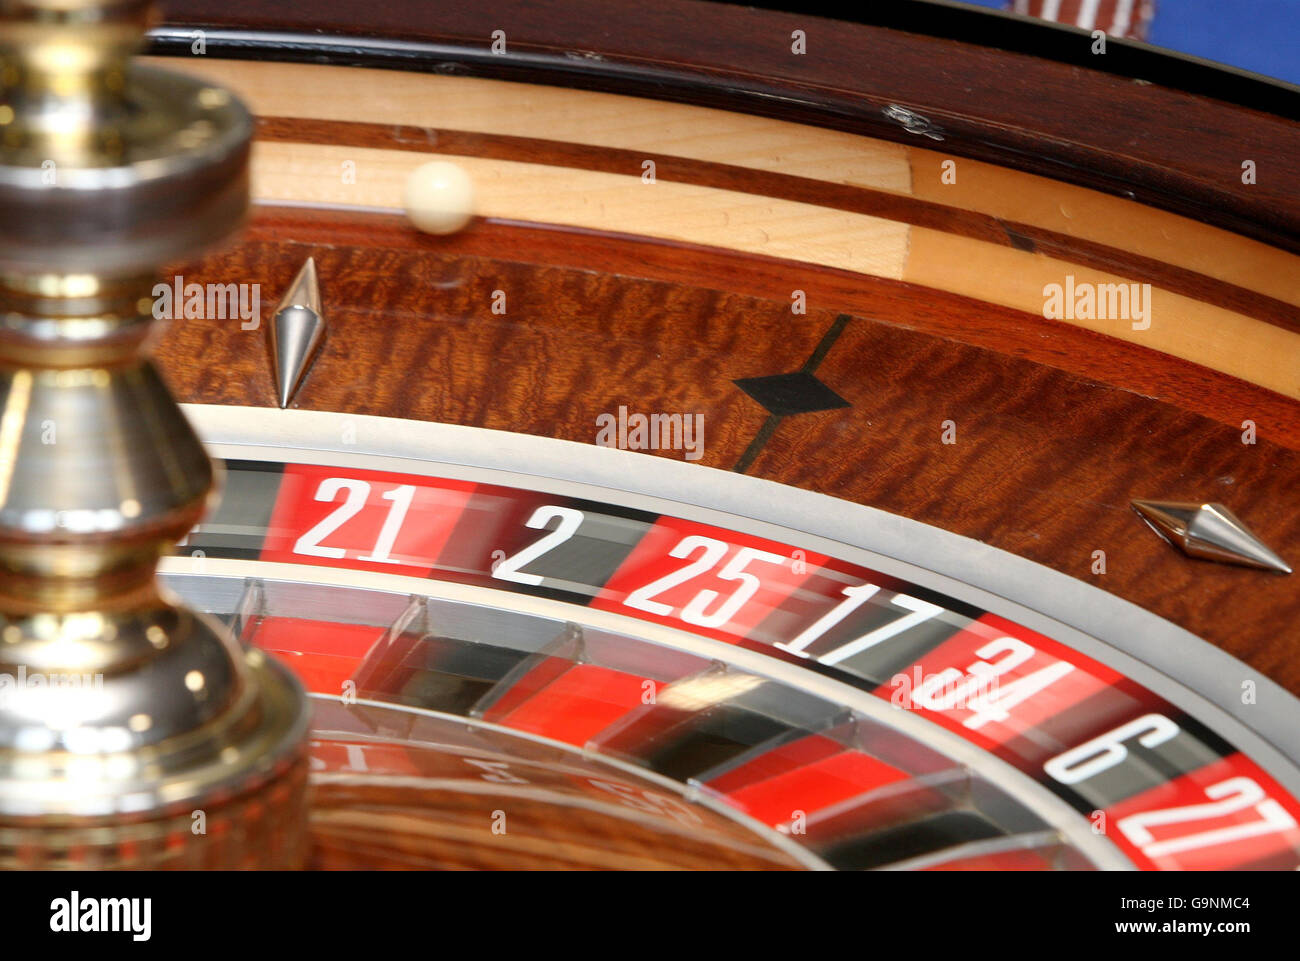 A spinning roulette wheel at the regional gaming academy at Blackpool and Fylde college, based in the Lancashire seaside town of Blackpool - one of the frontrunners among the seven areas shortlisted to host Britain's first supercasino. Stock Photo